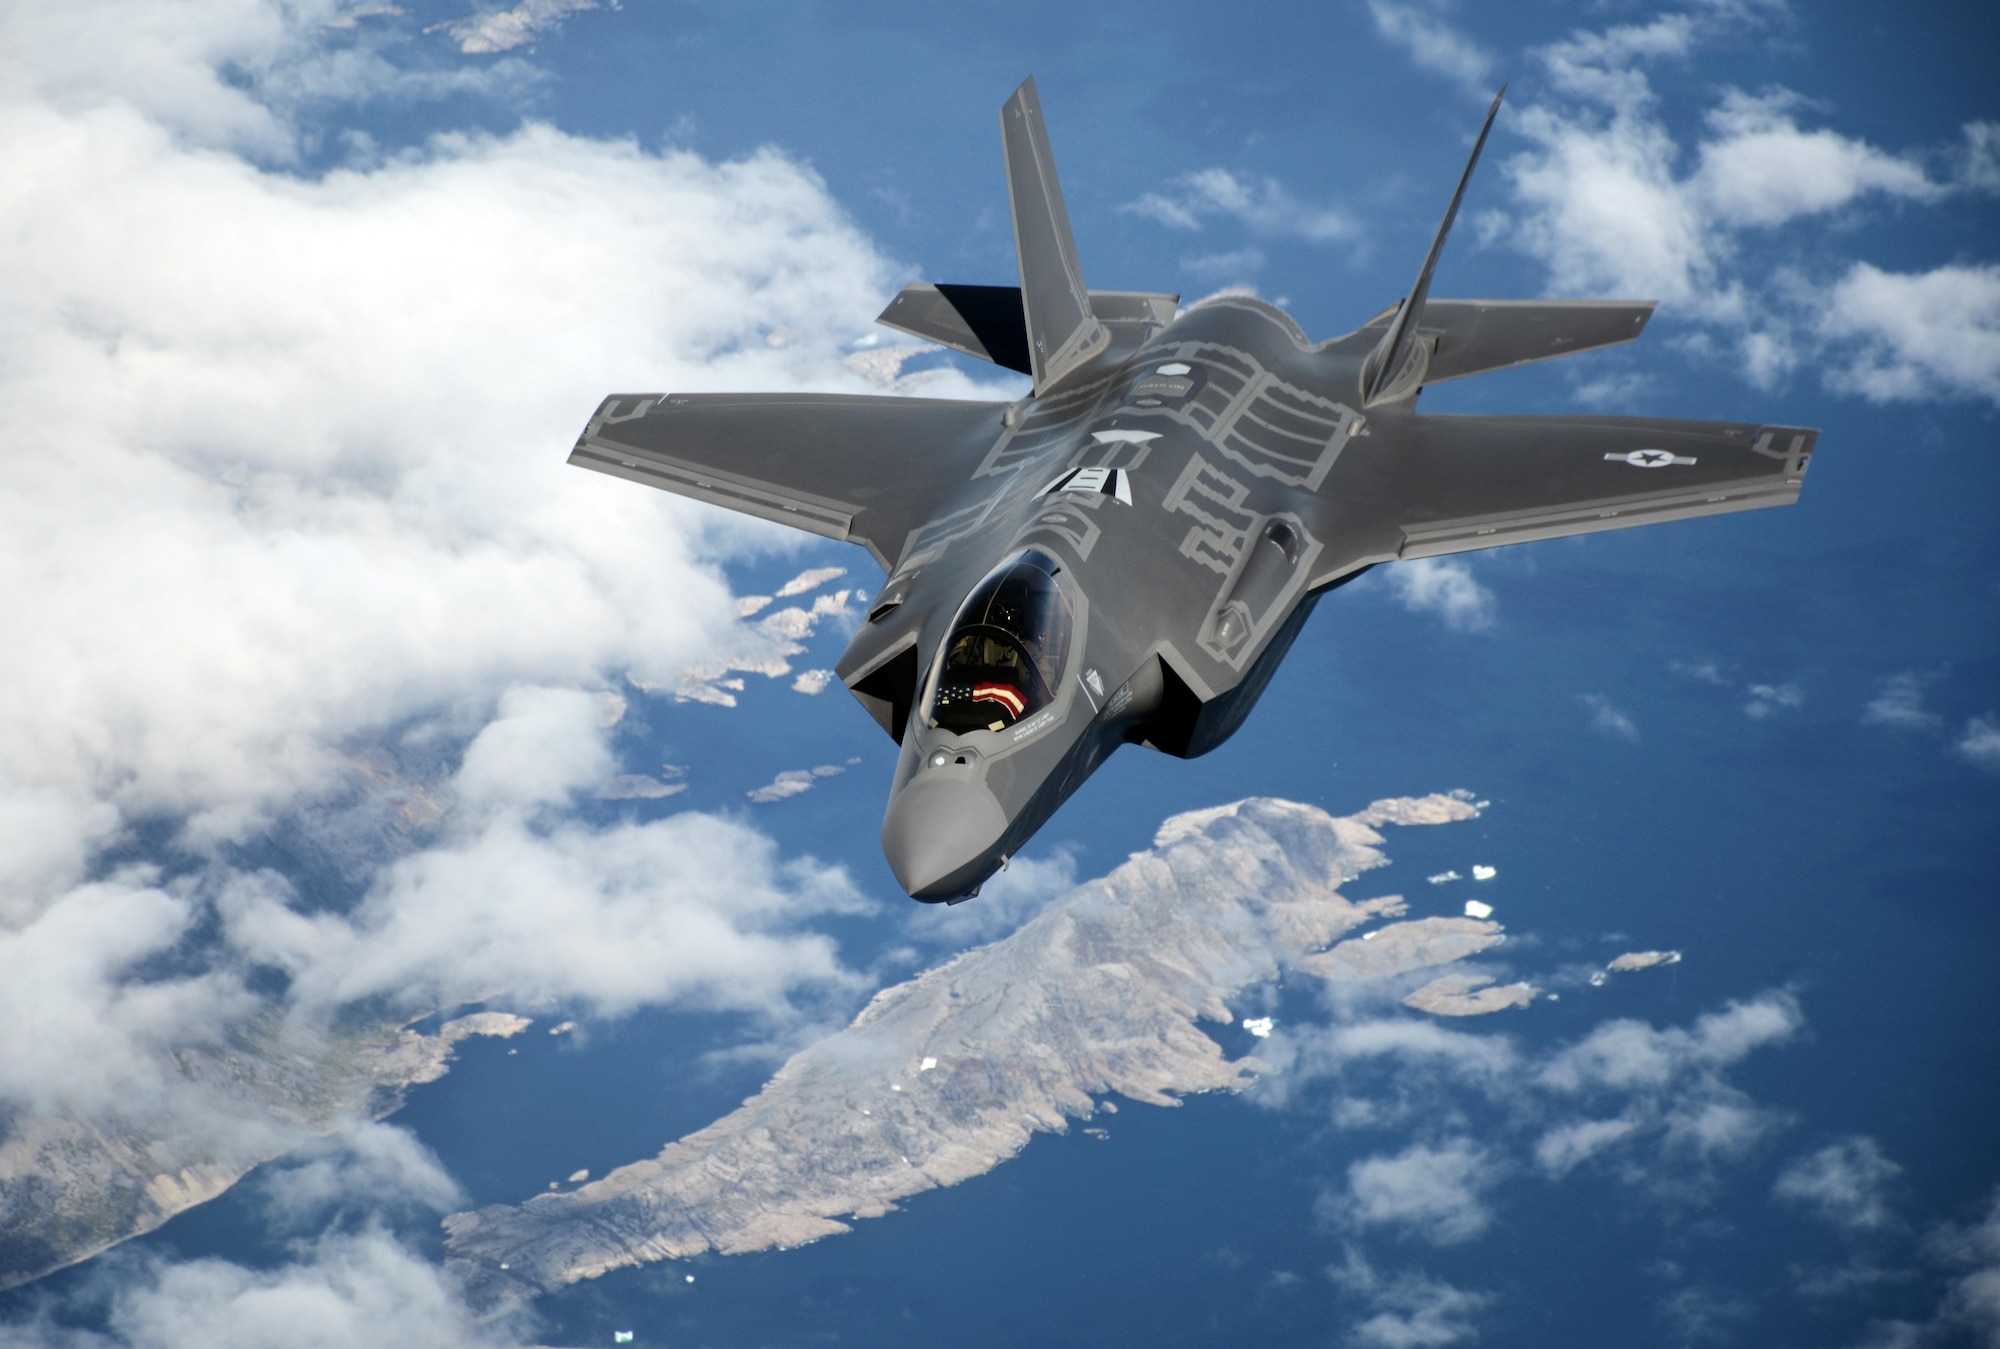 F-35A Lightning II aircraft receive aerial refuelings from a Travis KC-10 Extender July 13, 2016 on the flight from England to the United States. The fighters were returning to Luke Air Force Base, Arizona after participating in the world's largest air show. (U.S. Air Force photos by Staff Sgt. Madelyn Brown) 